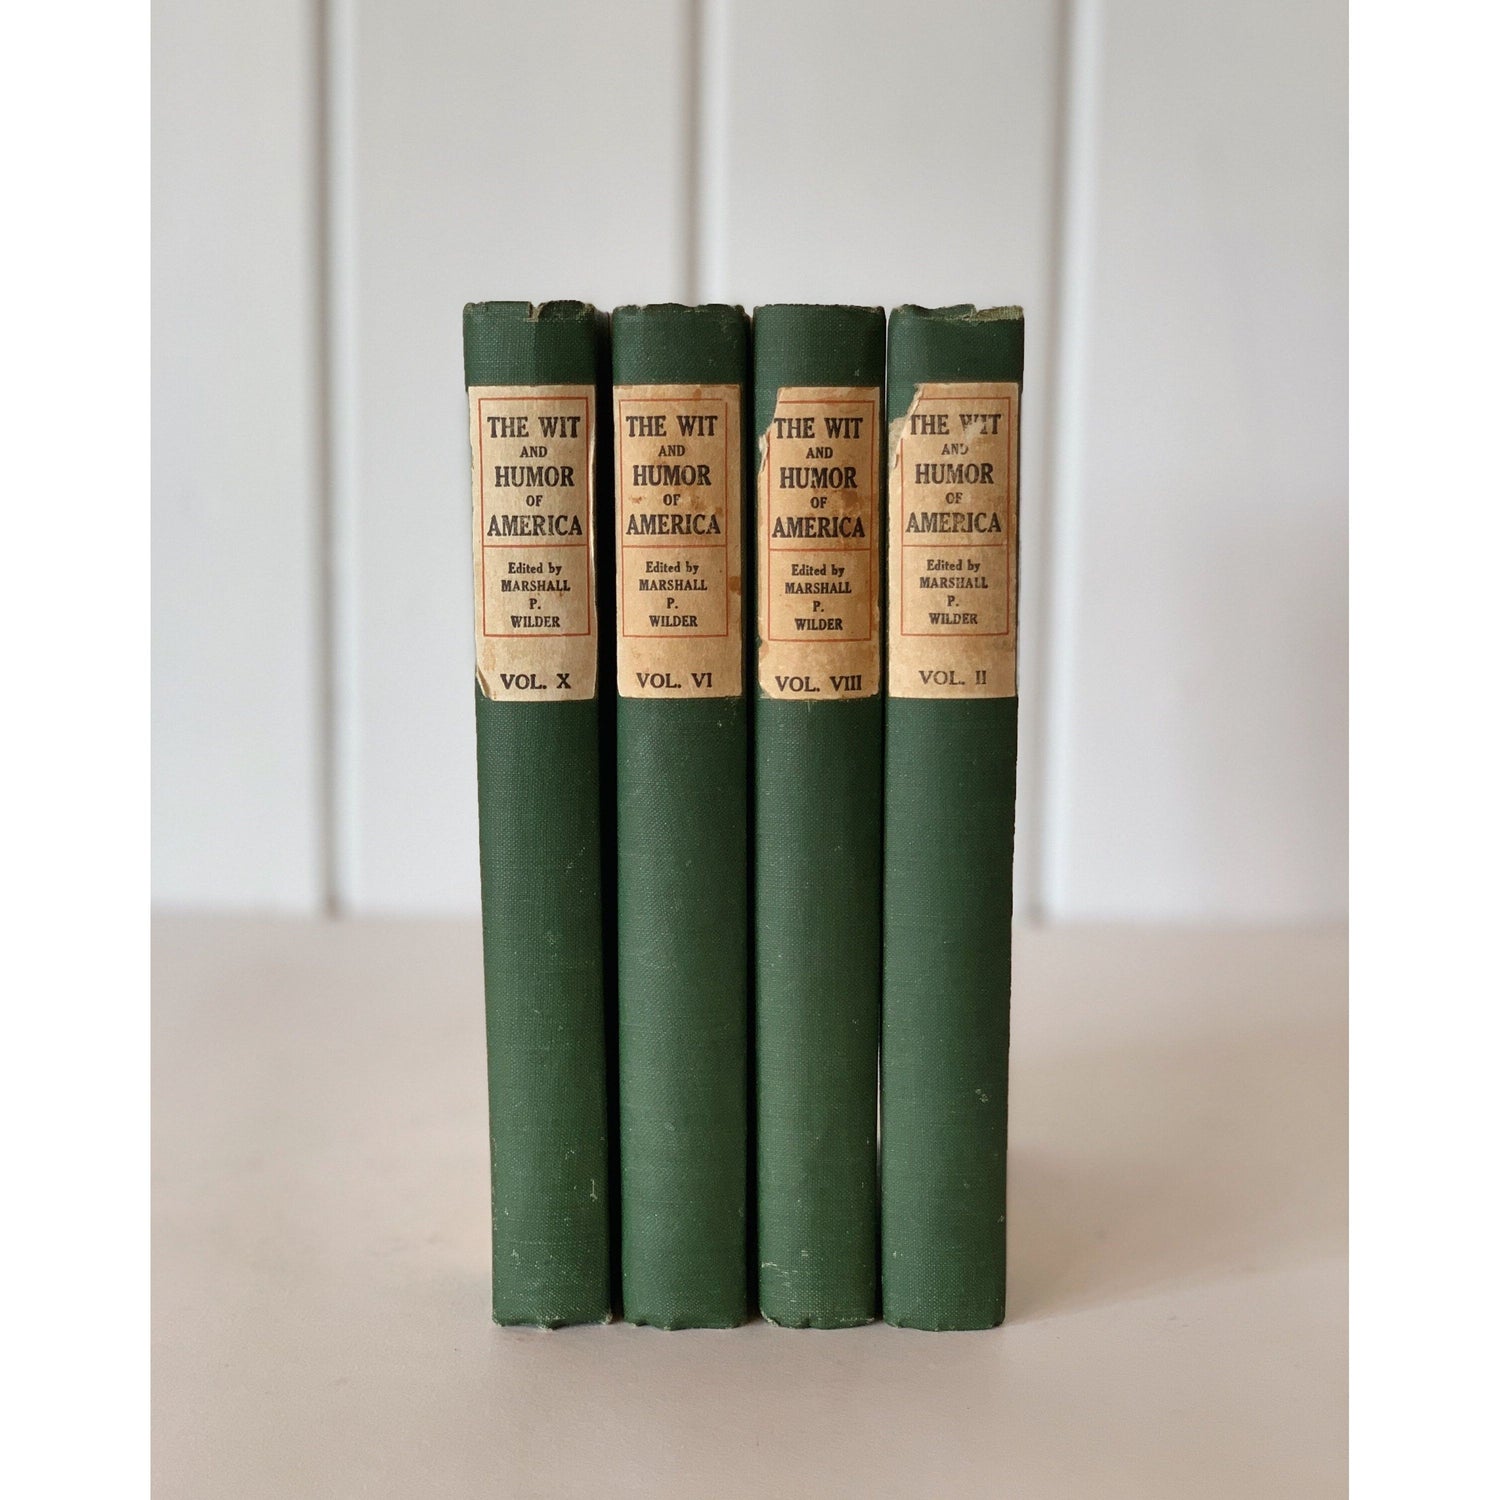 Decorative Books, Antique Green Books for Display, Shabby Book Set